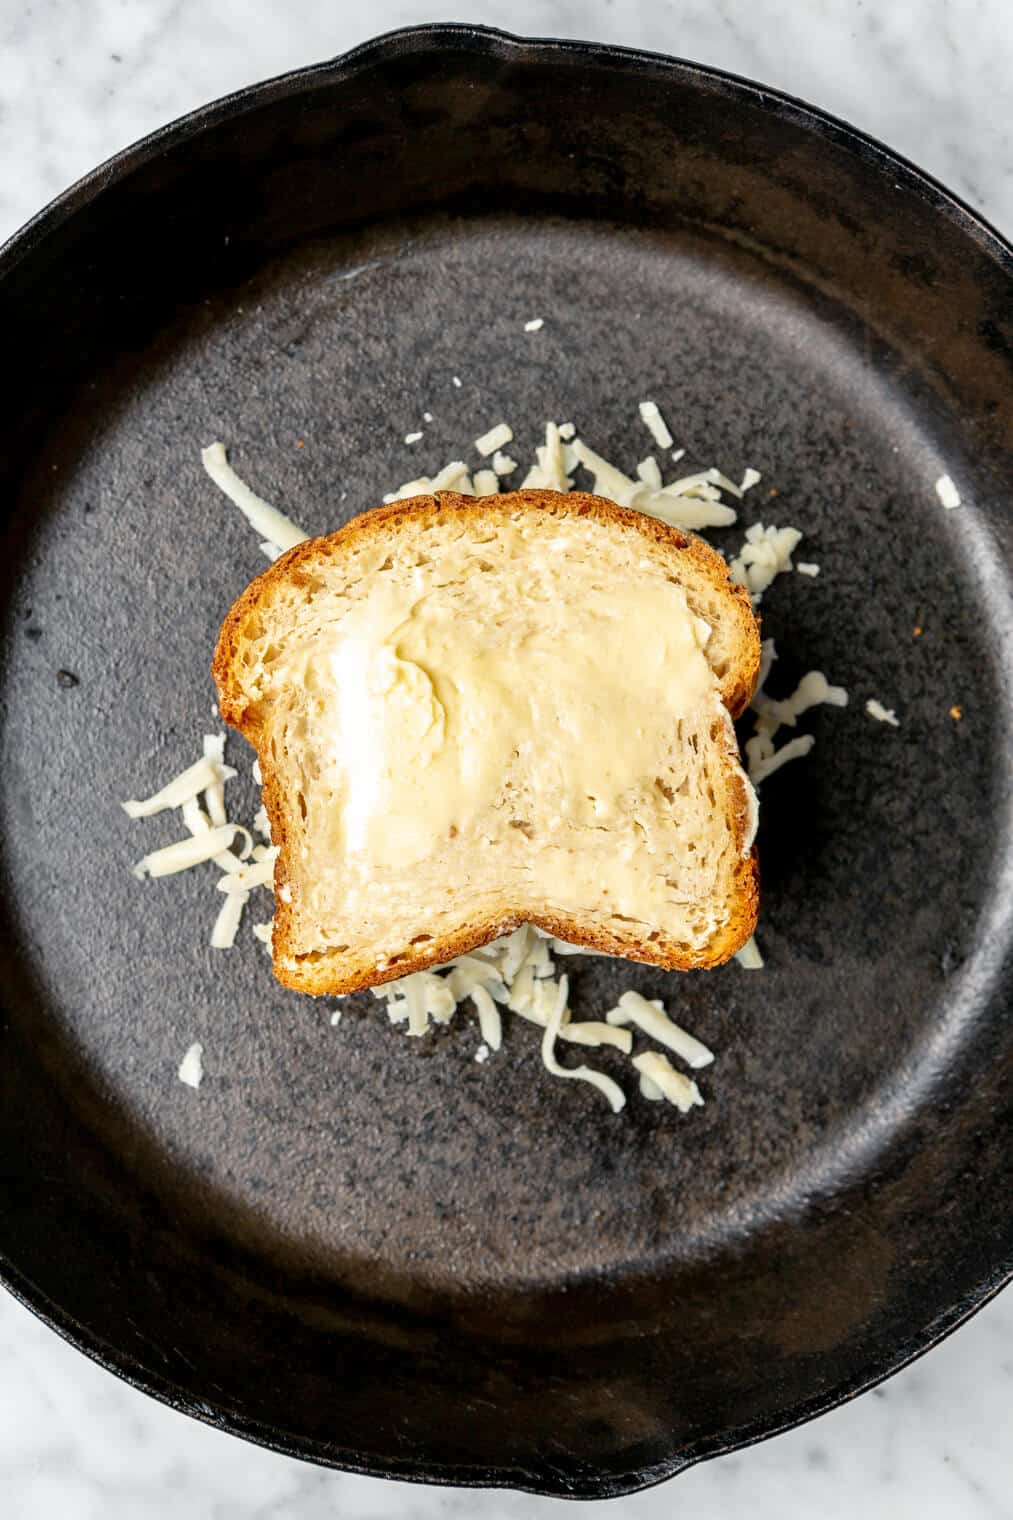 Buttered slice of bread on top of shredded cheese in a cast iron pan.